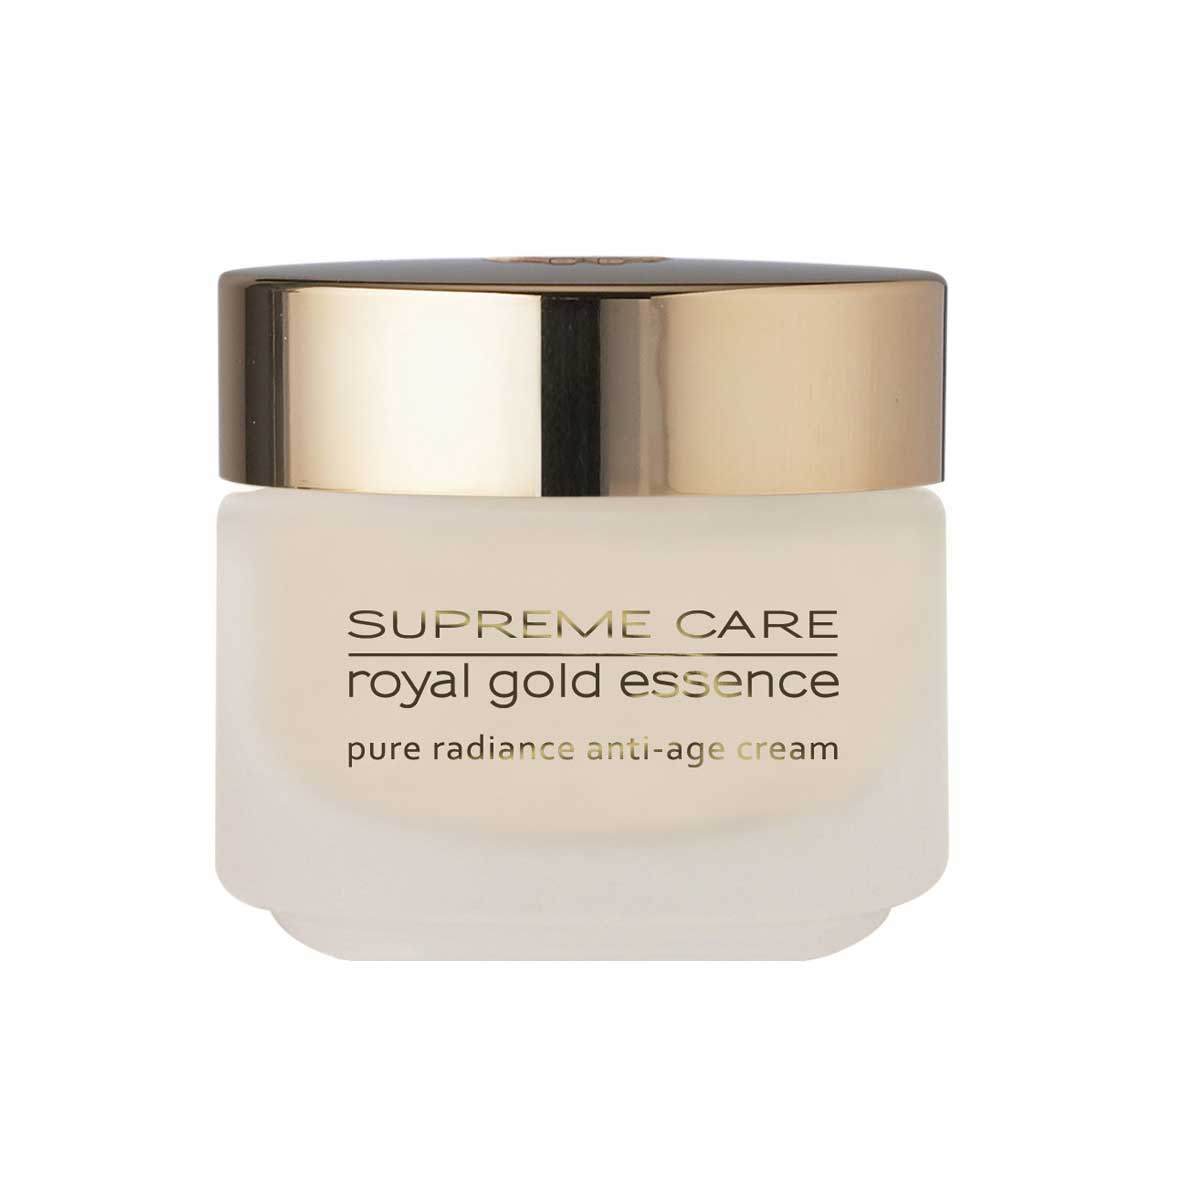 Image of Arval Supreme Care Royal Gold Essence Pure Radiance Anti - Age Cream 50 ml